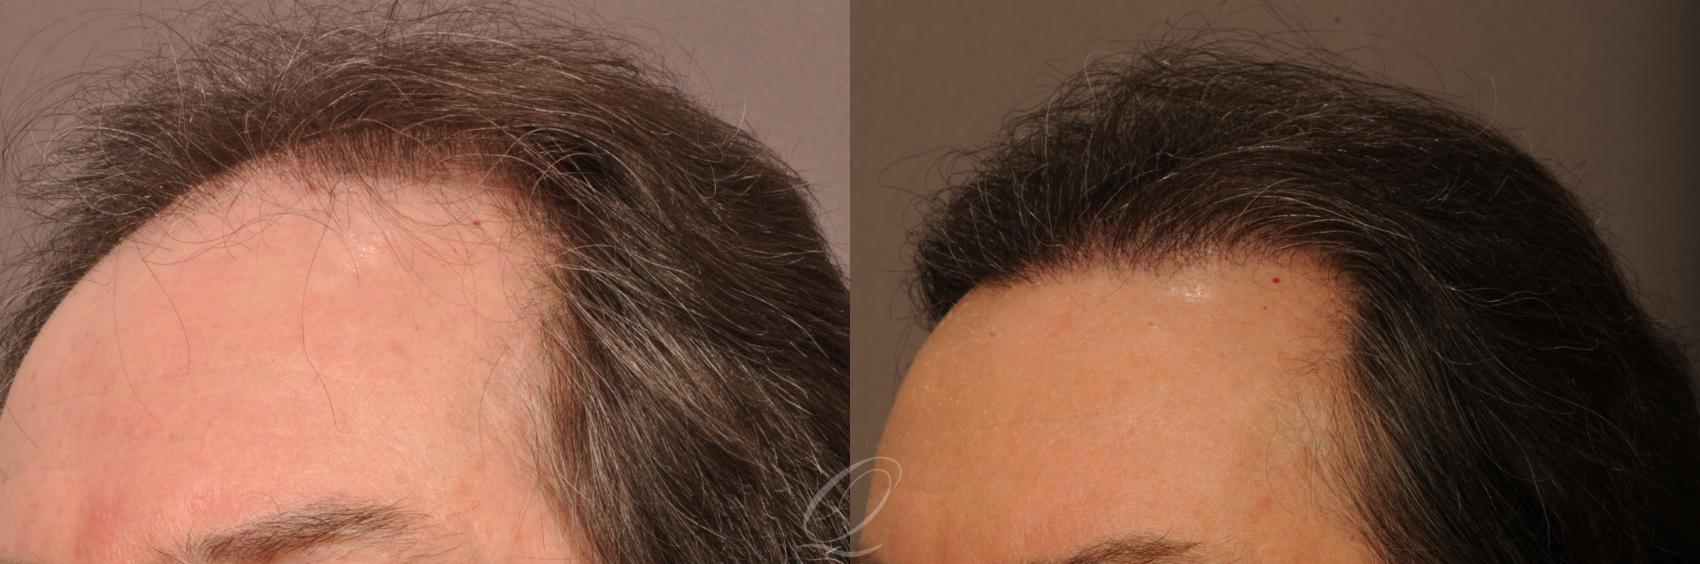 FUT Case 1018 Before & After View #4 | Rochester, Buffalo, & Syracuse, NY | Quatela Center for Hair Restoration